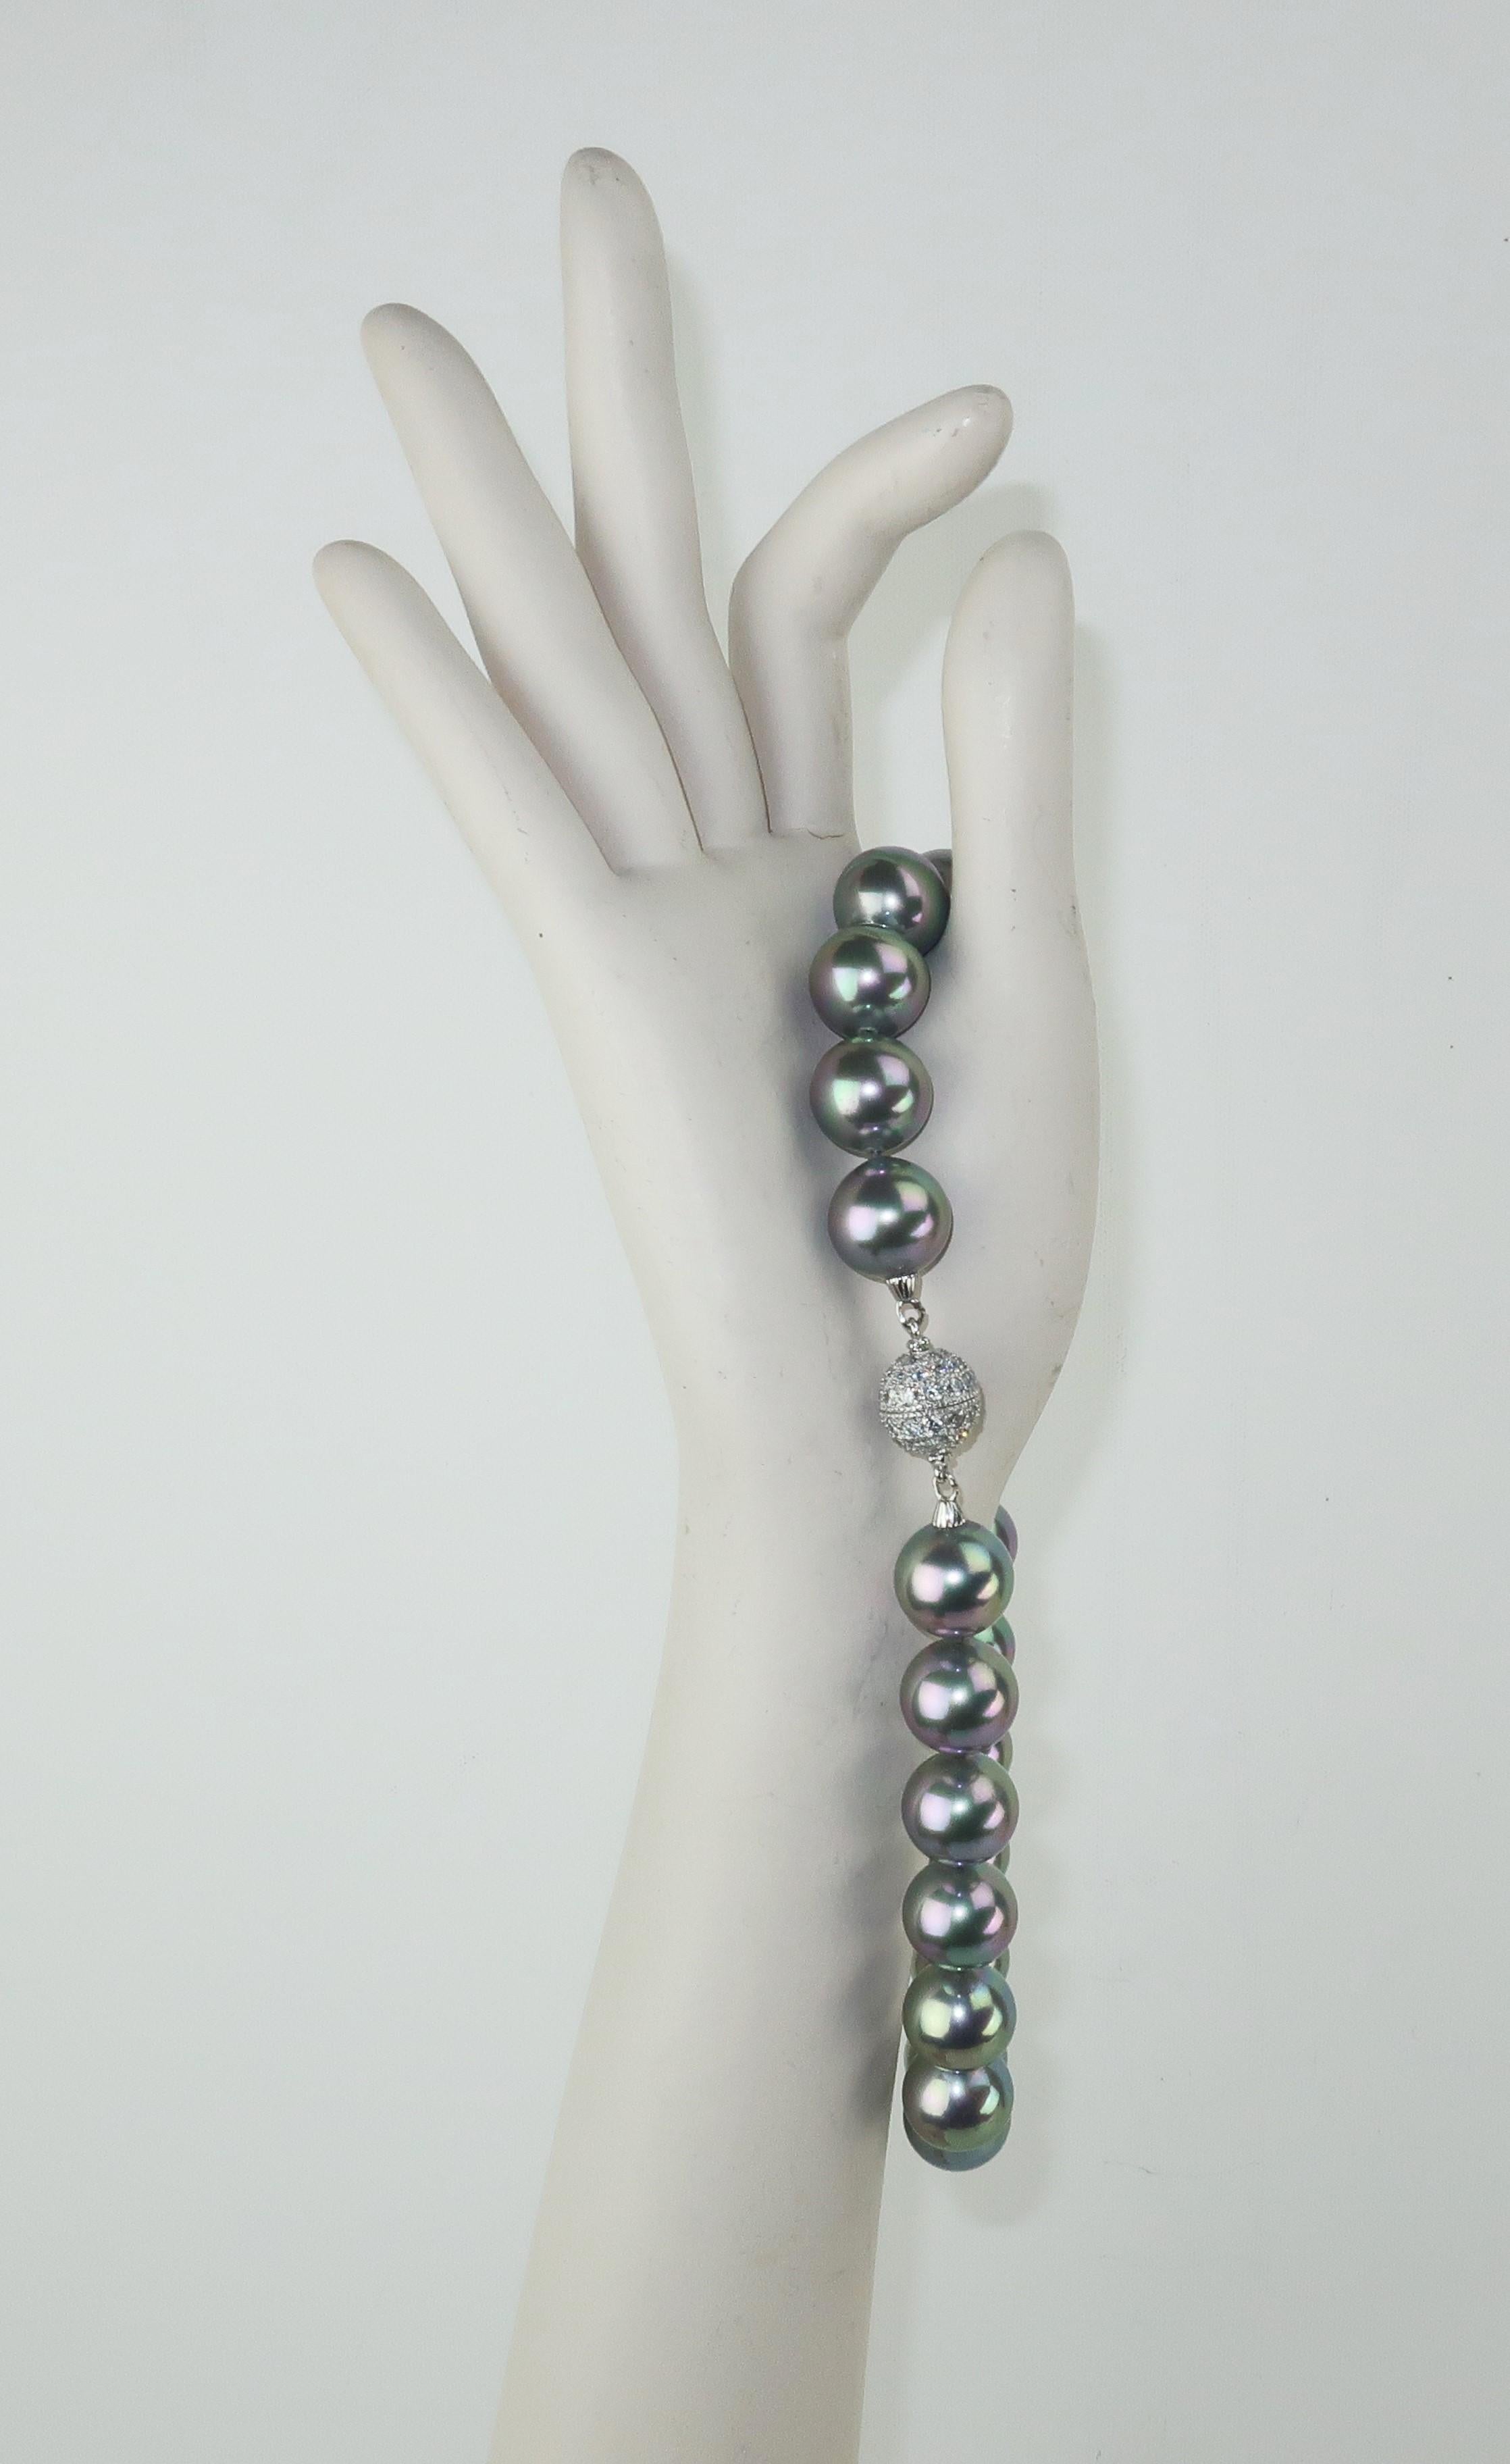 Faux Gray Pearl Choker Necklace With Rhinestone Closure For Sale 4